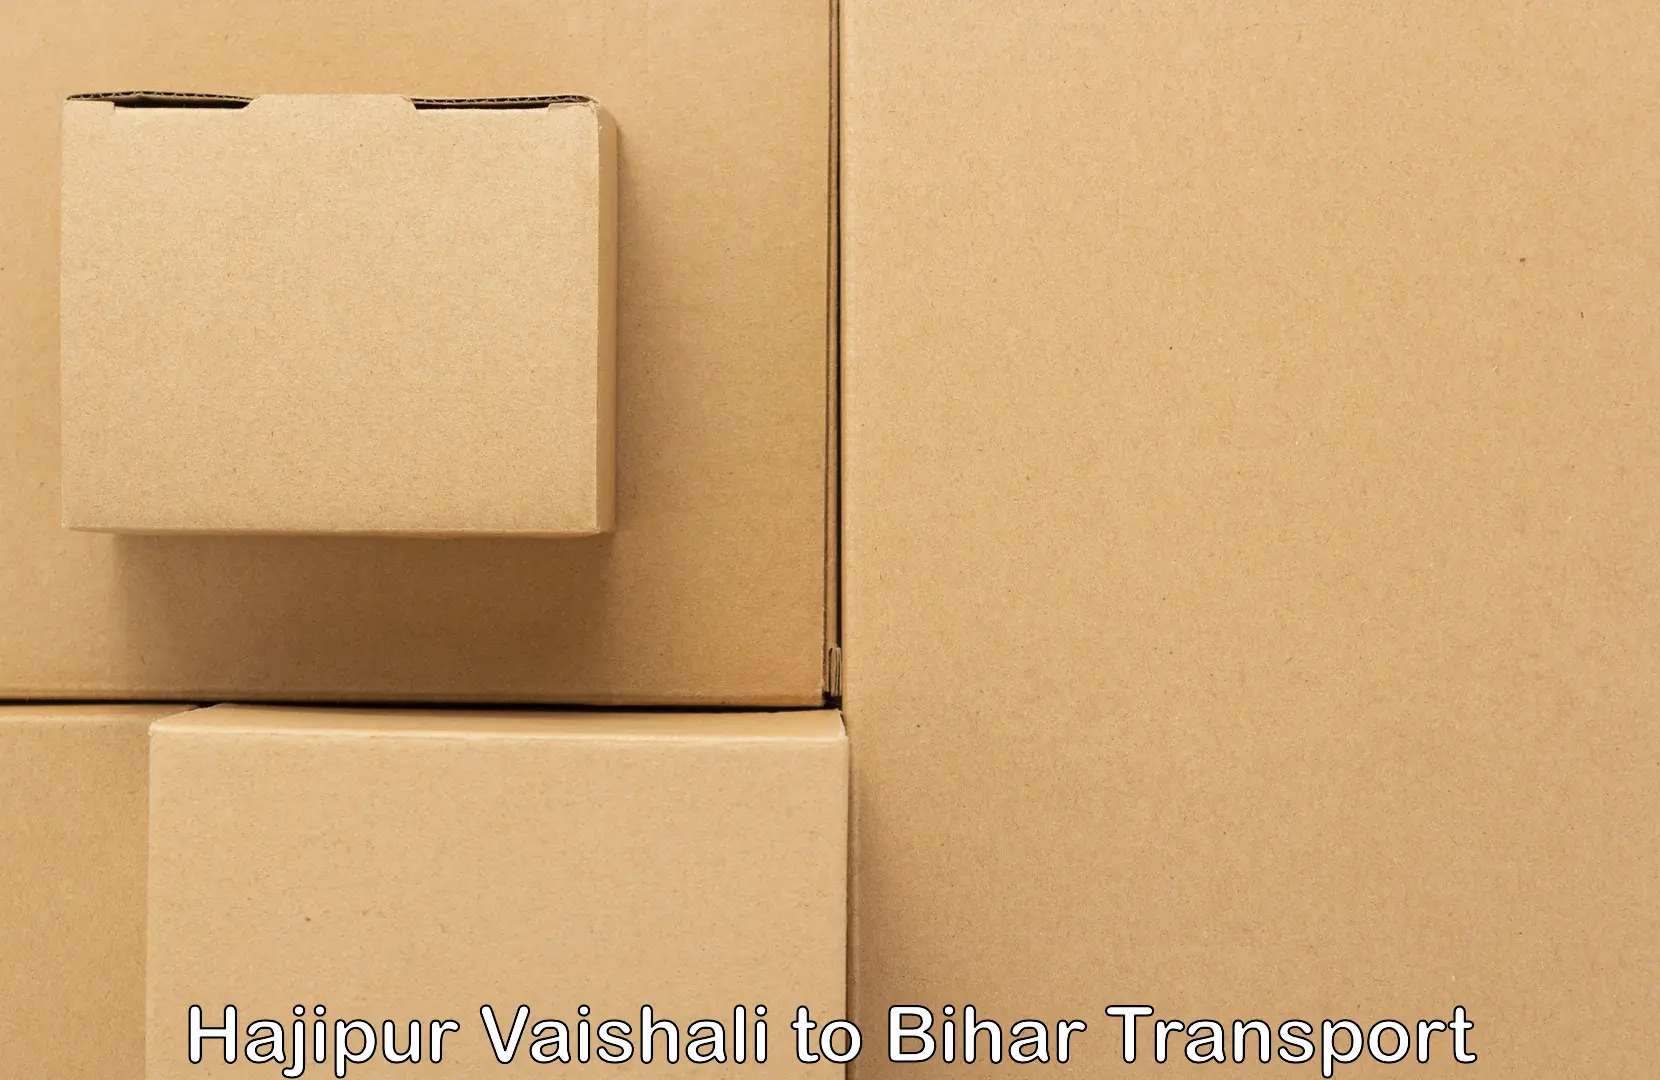 Air freight transport services Hajipur Vaishali to West Champaran